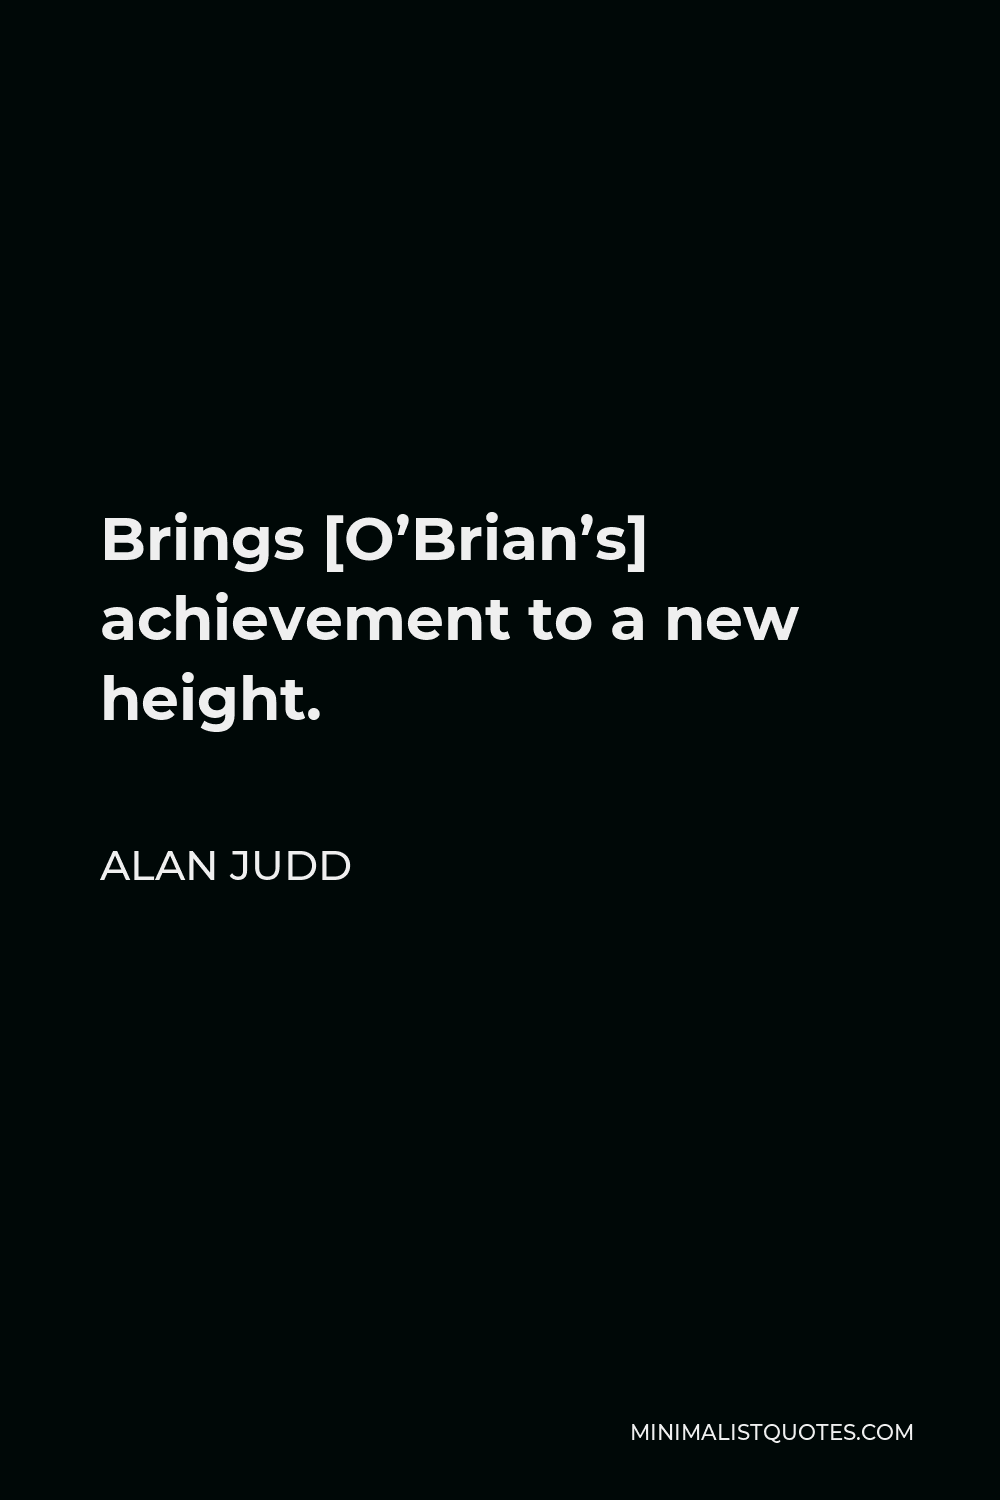 Alan Judd Quote - Brings [O’Brian’s] achievement to a new height.